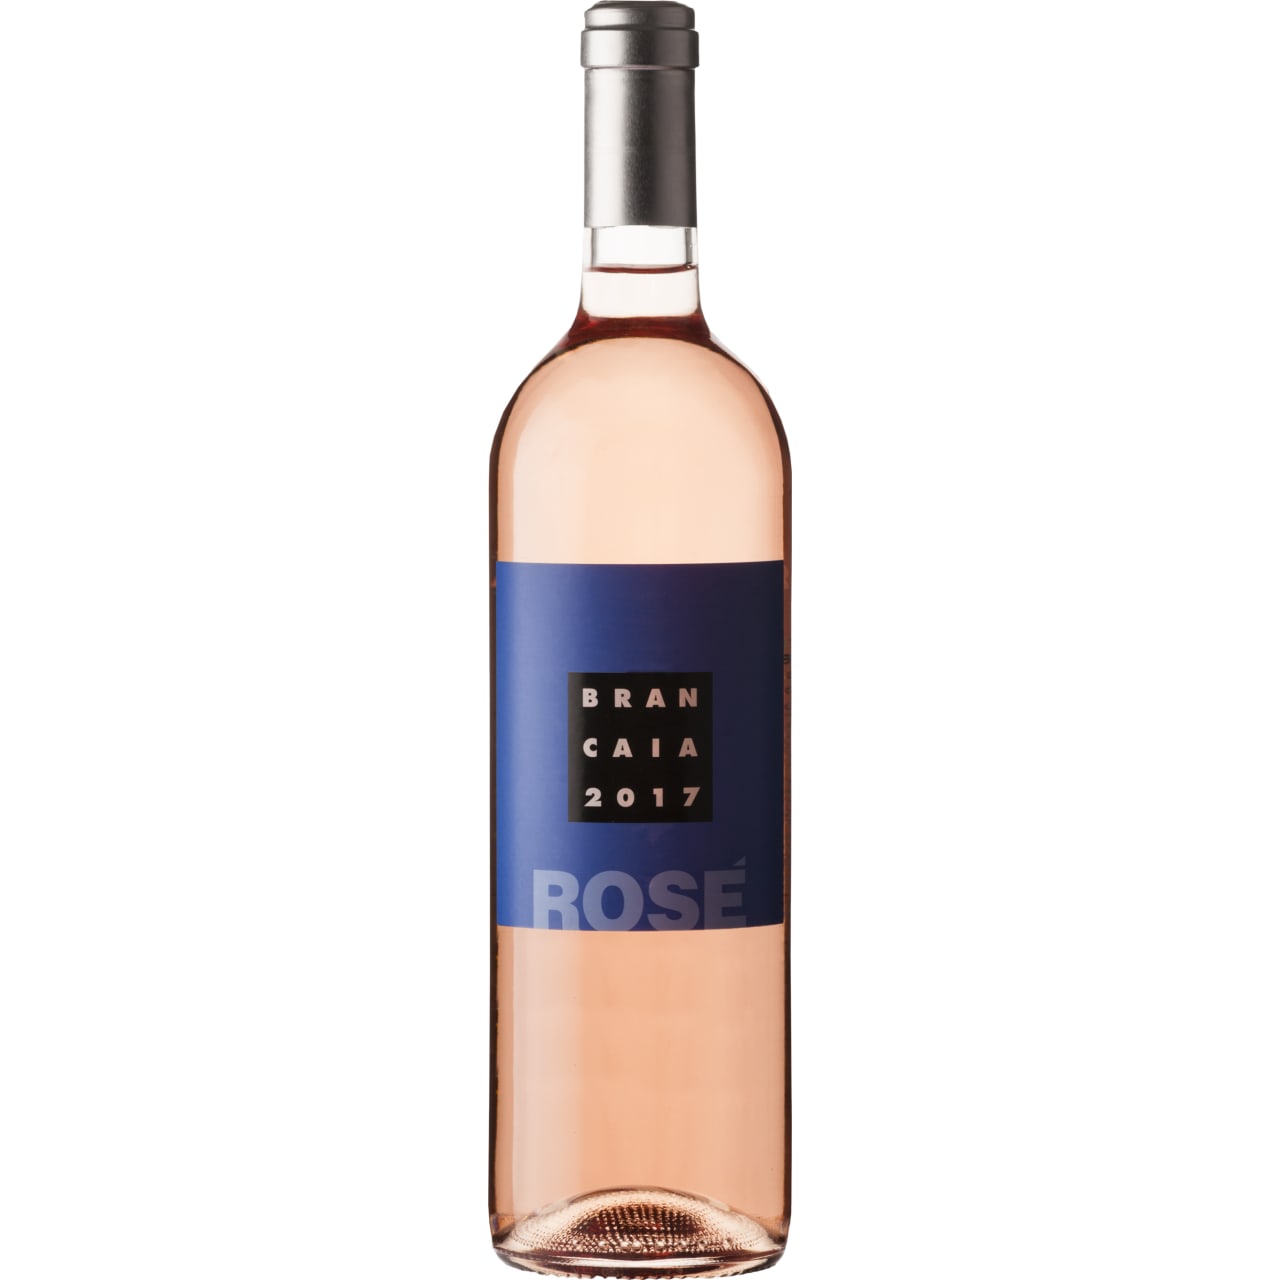 Elegant rosé, bursting with wild strawberries, rhubarb and a tangy squirt of tangerine.